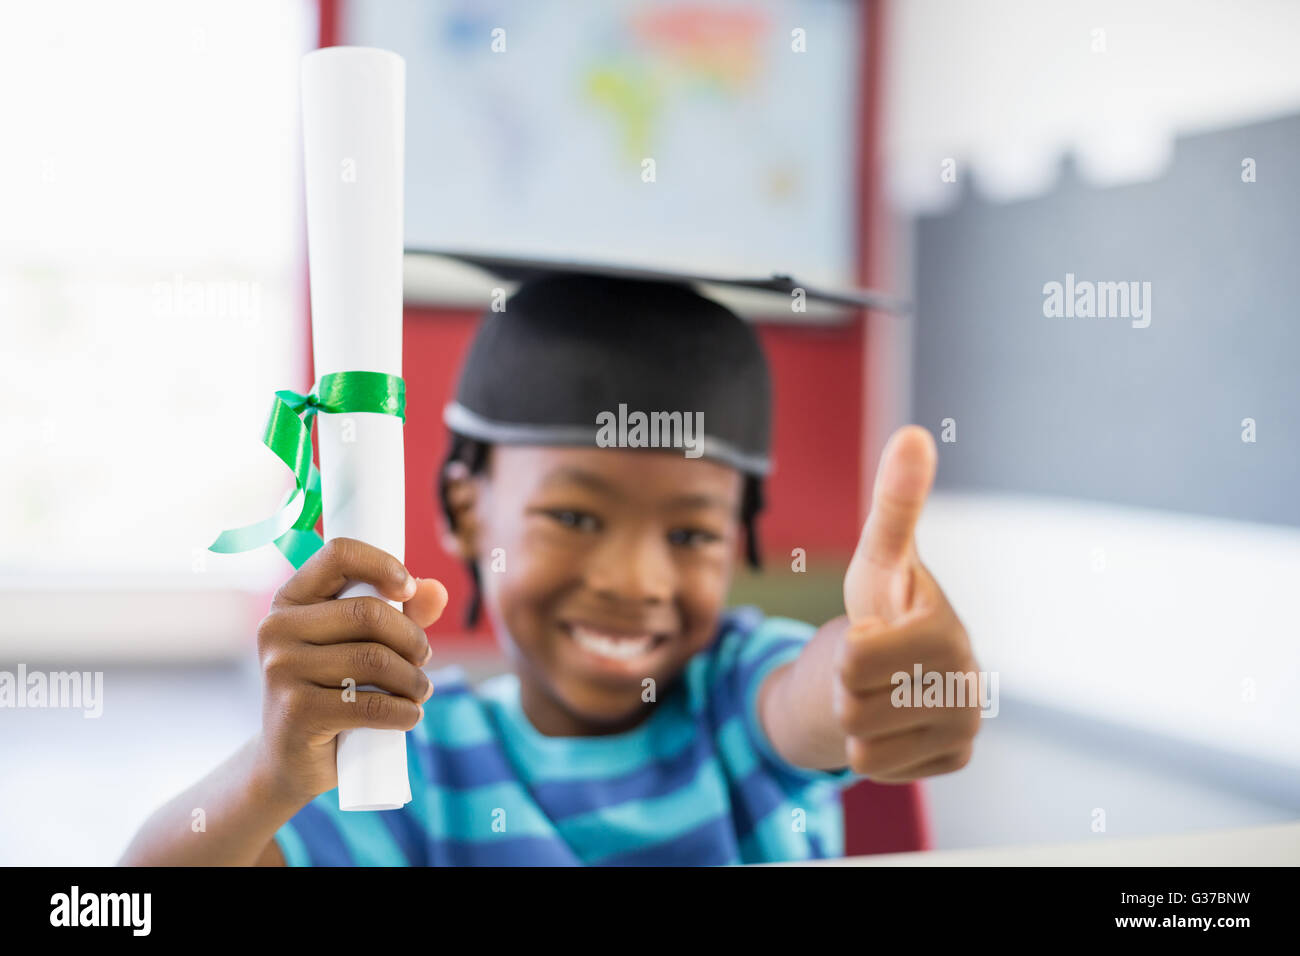 Schoolboy in mortar board holding certificate and showing thumbs up in classroom Stock Photo